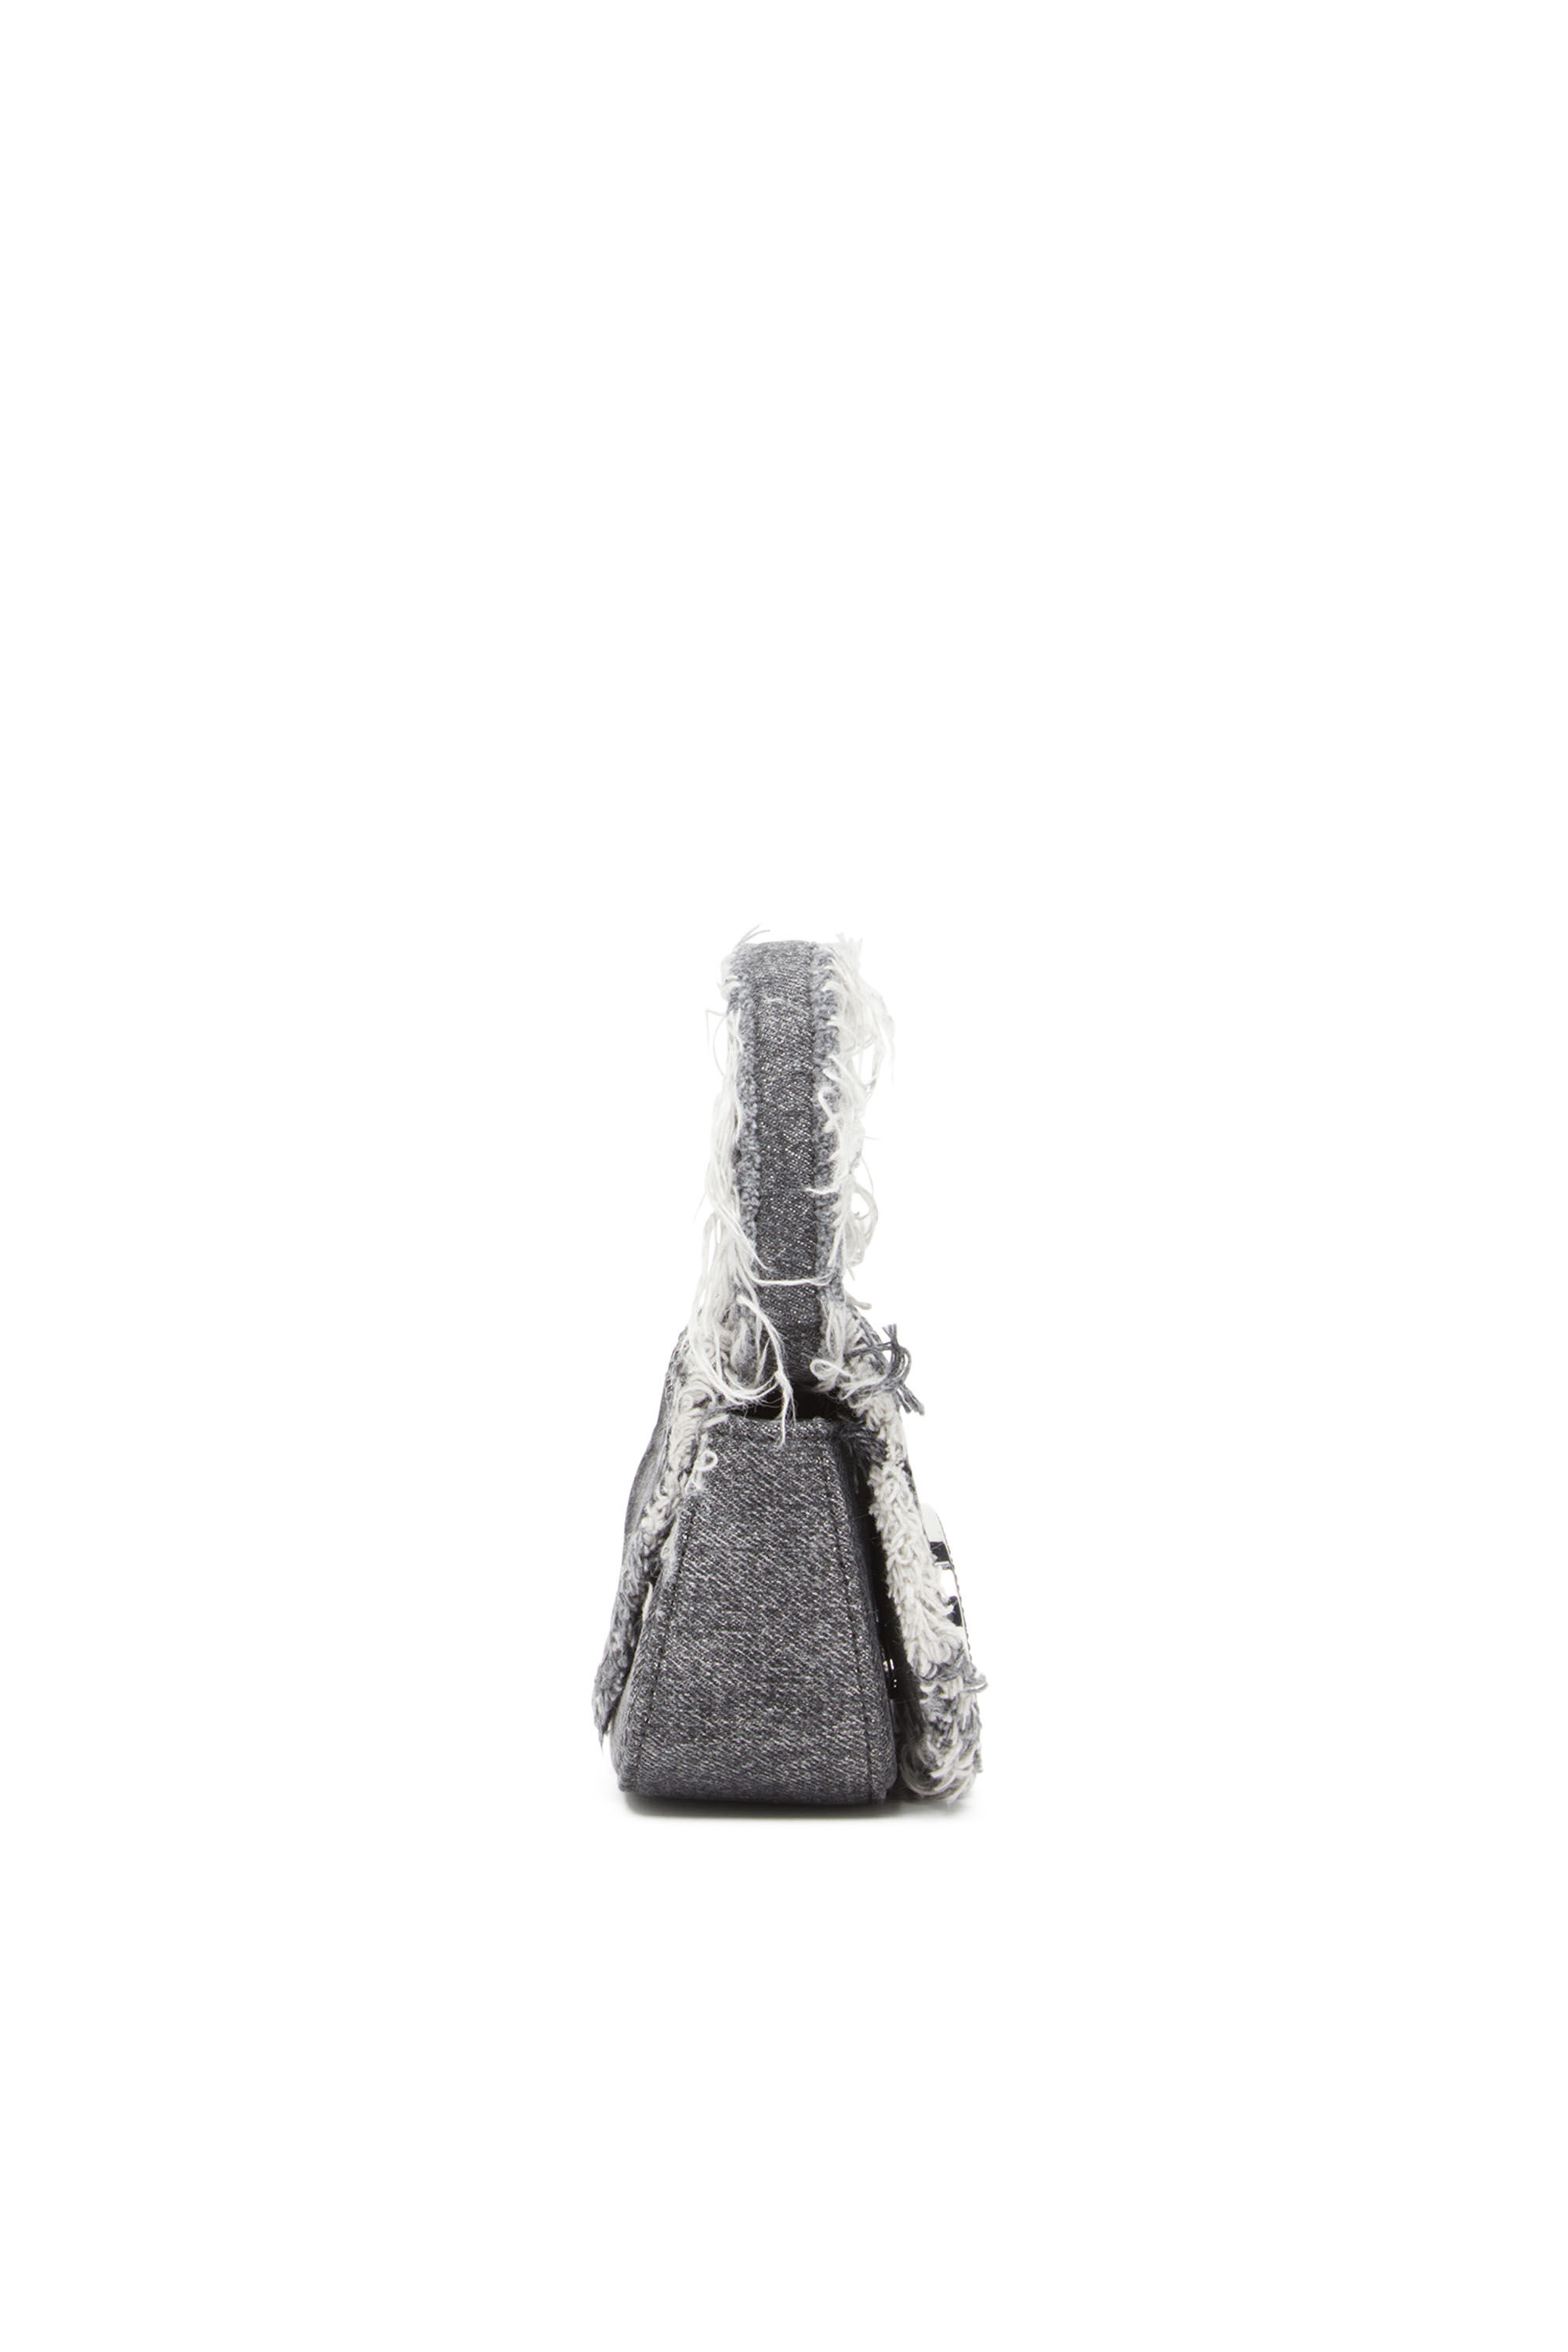 Diesel - 1DR XS, Woman 1DR XS-Iconic mini bag in denim and crystals in Black - Image 4